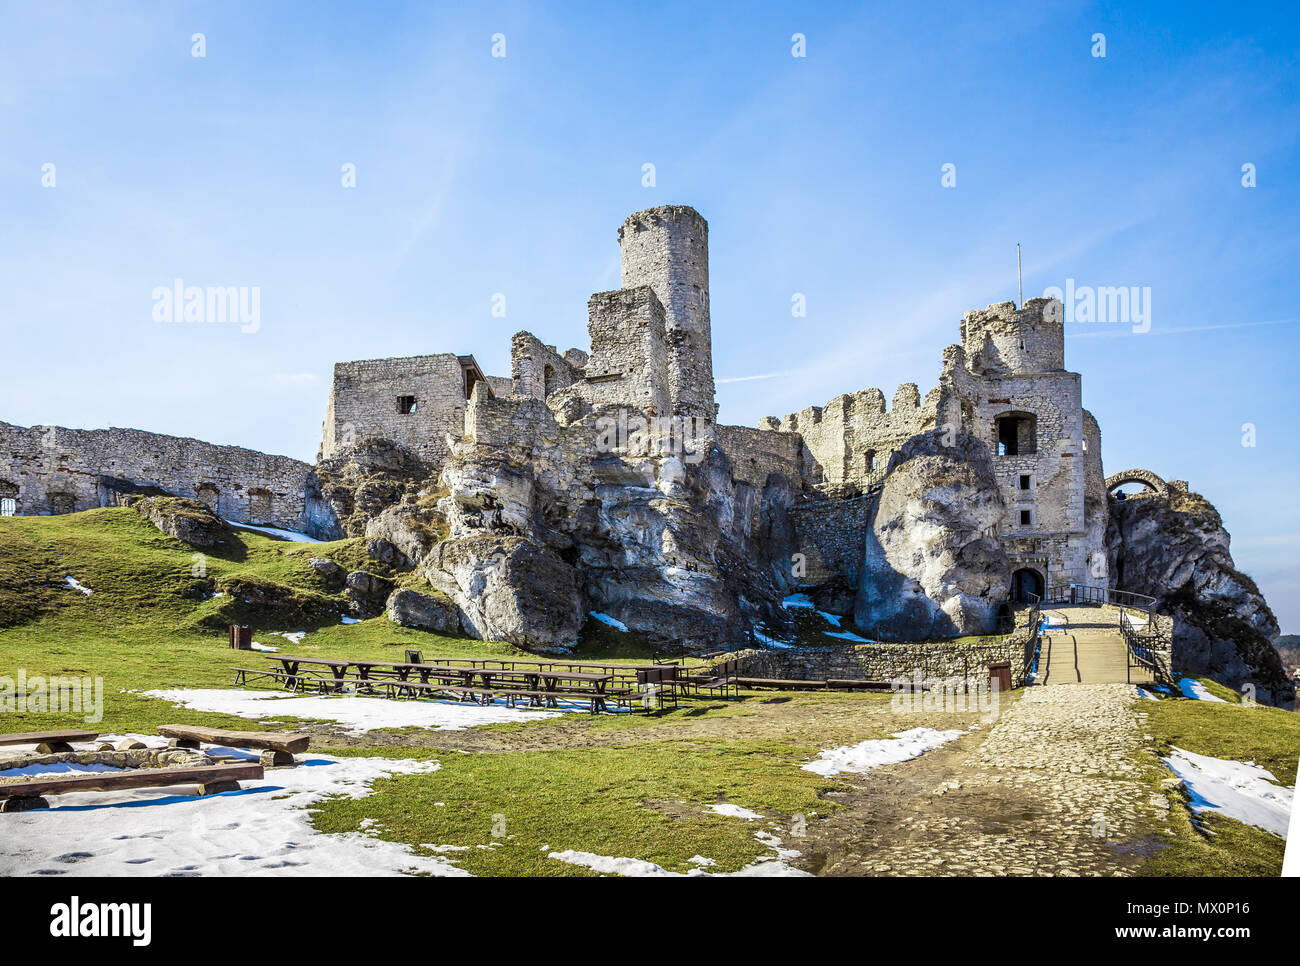 Outside view of Ogrodzieniec medieval castle in Poland Stock Photo